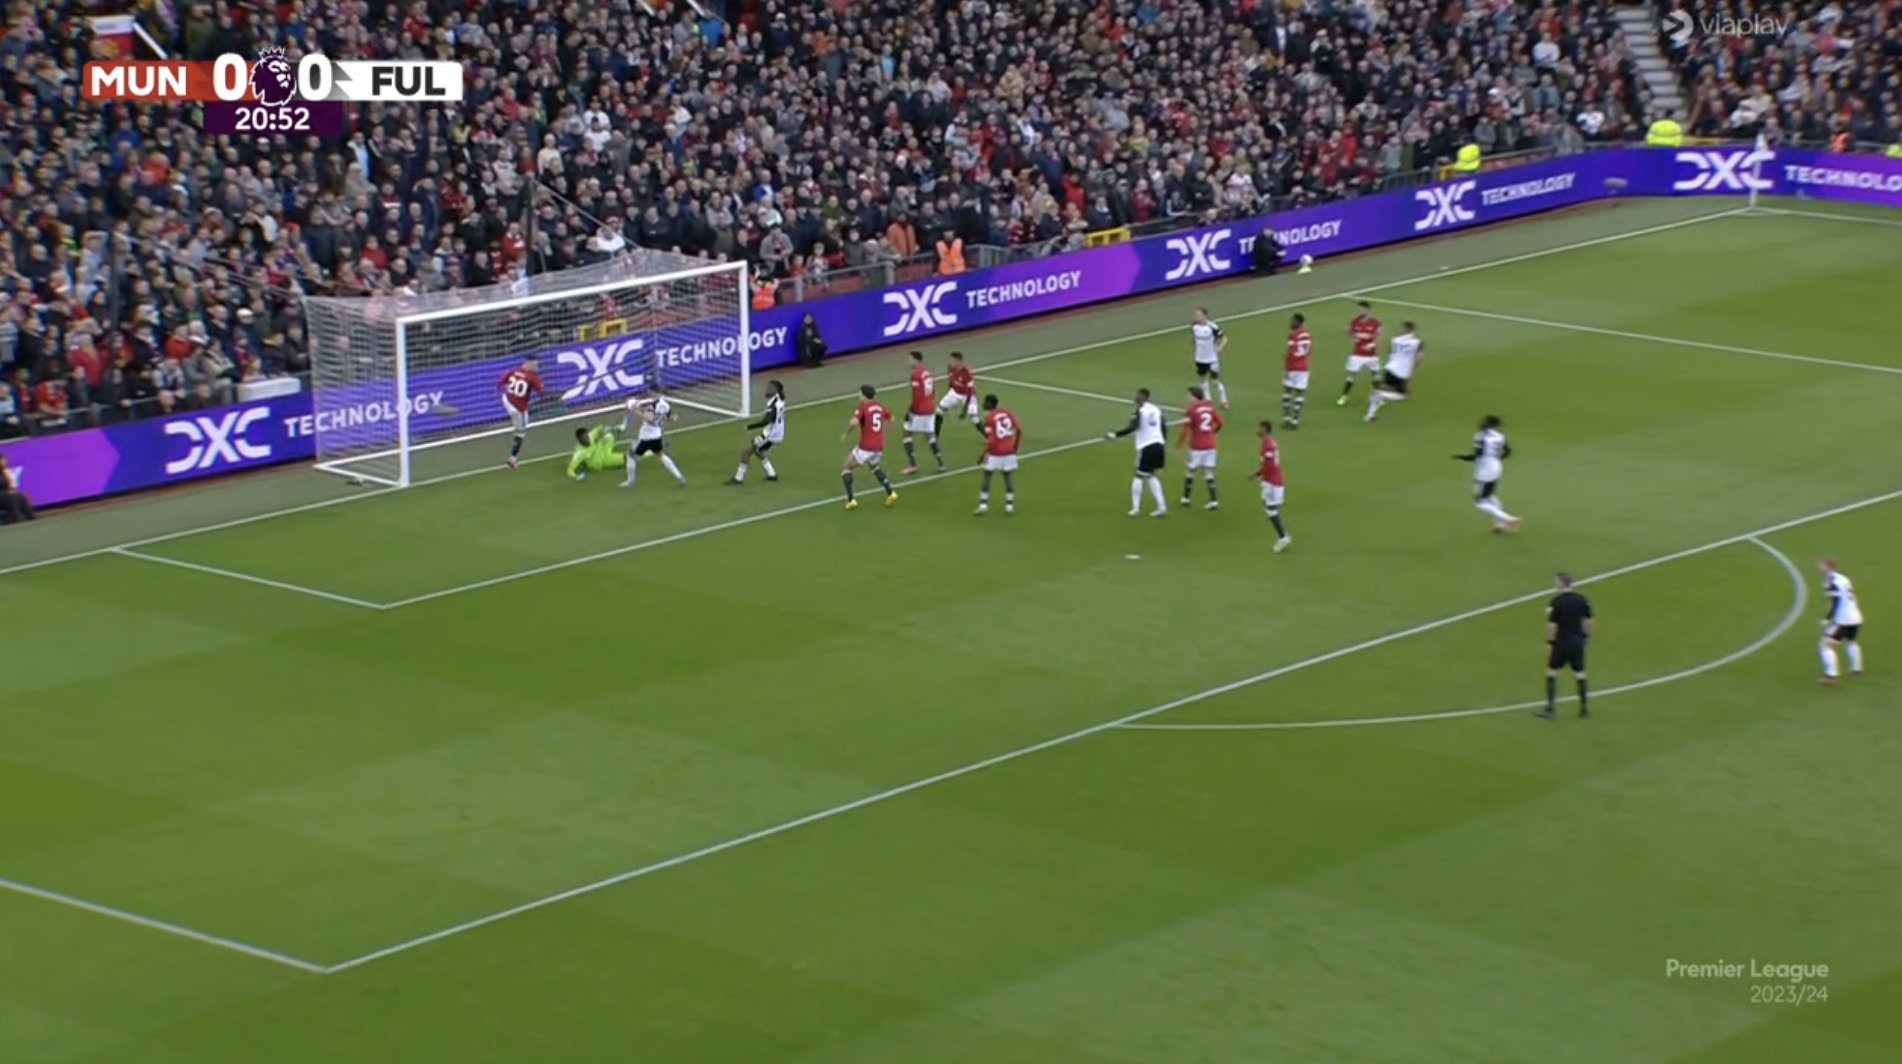 𝐀𝐅𝐂 𝐀𝐉𝐀𝐗  on X: " - Onana with a BIG save to deny Manchester  United from going 1-0 down! Fulham the MUCH better team at Old Trafford!  https://t.co/69f9WKncJa" / X